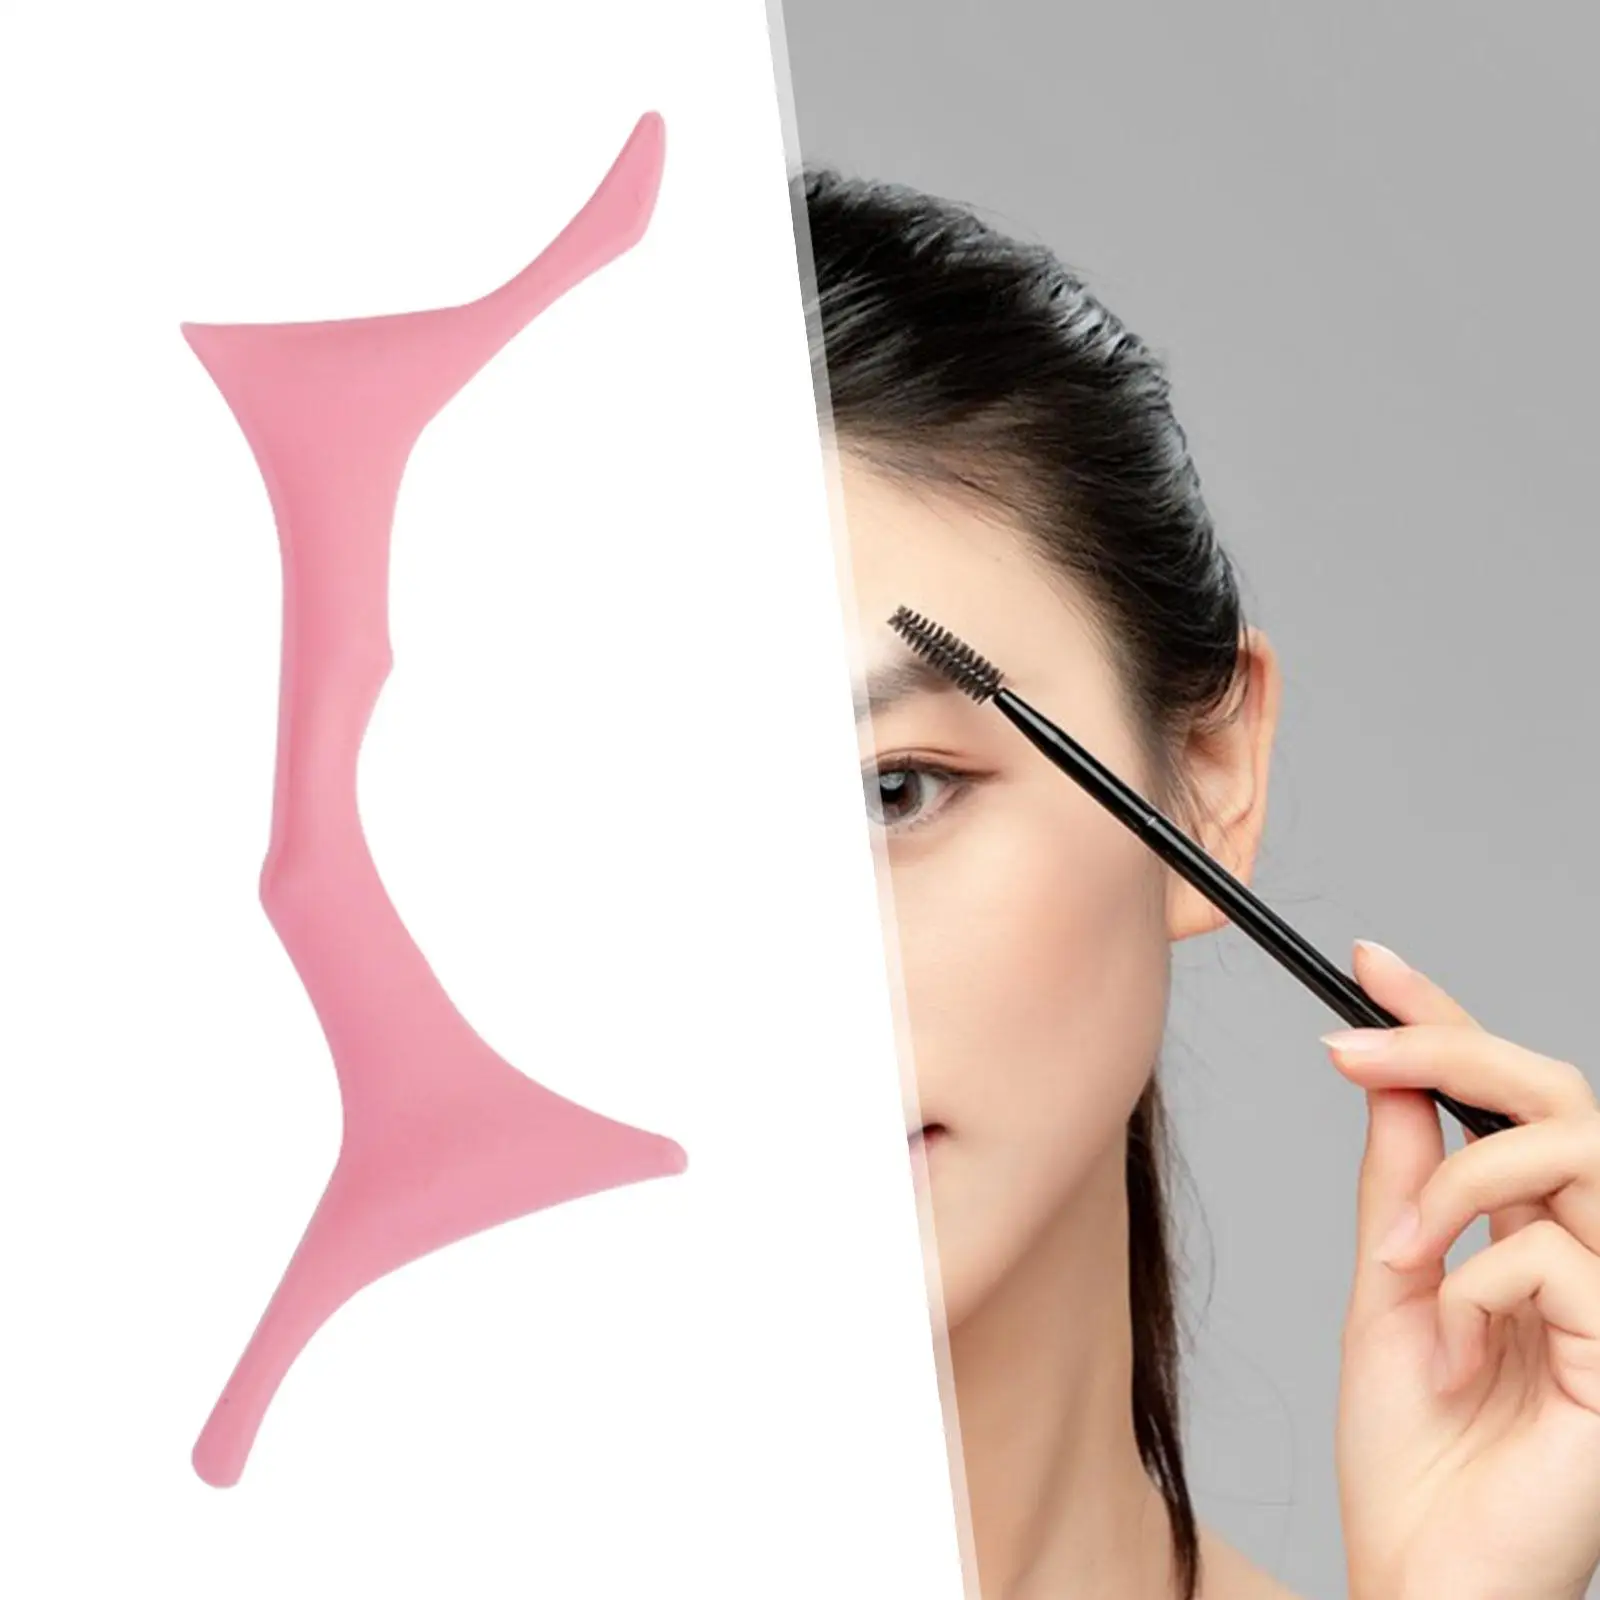 Silicone Eyebrow Shaping Tool Eyeliner Stencil Waterproof Comfortable to Hold Soft and Smooth Multipurpose for Most Skin Types